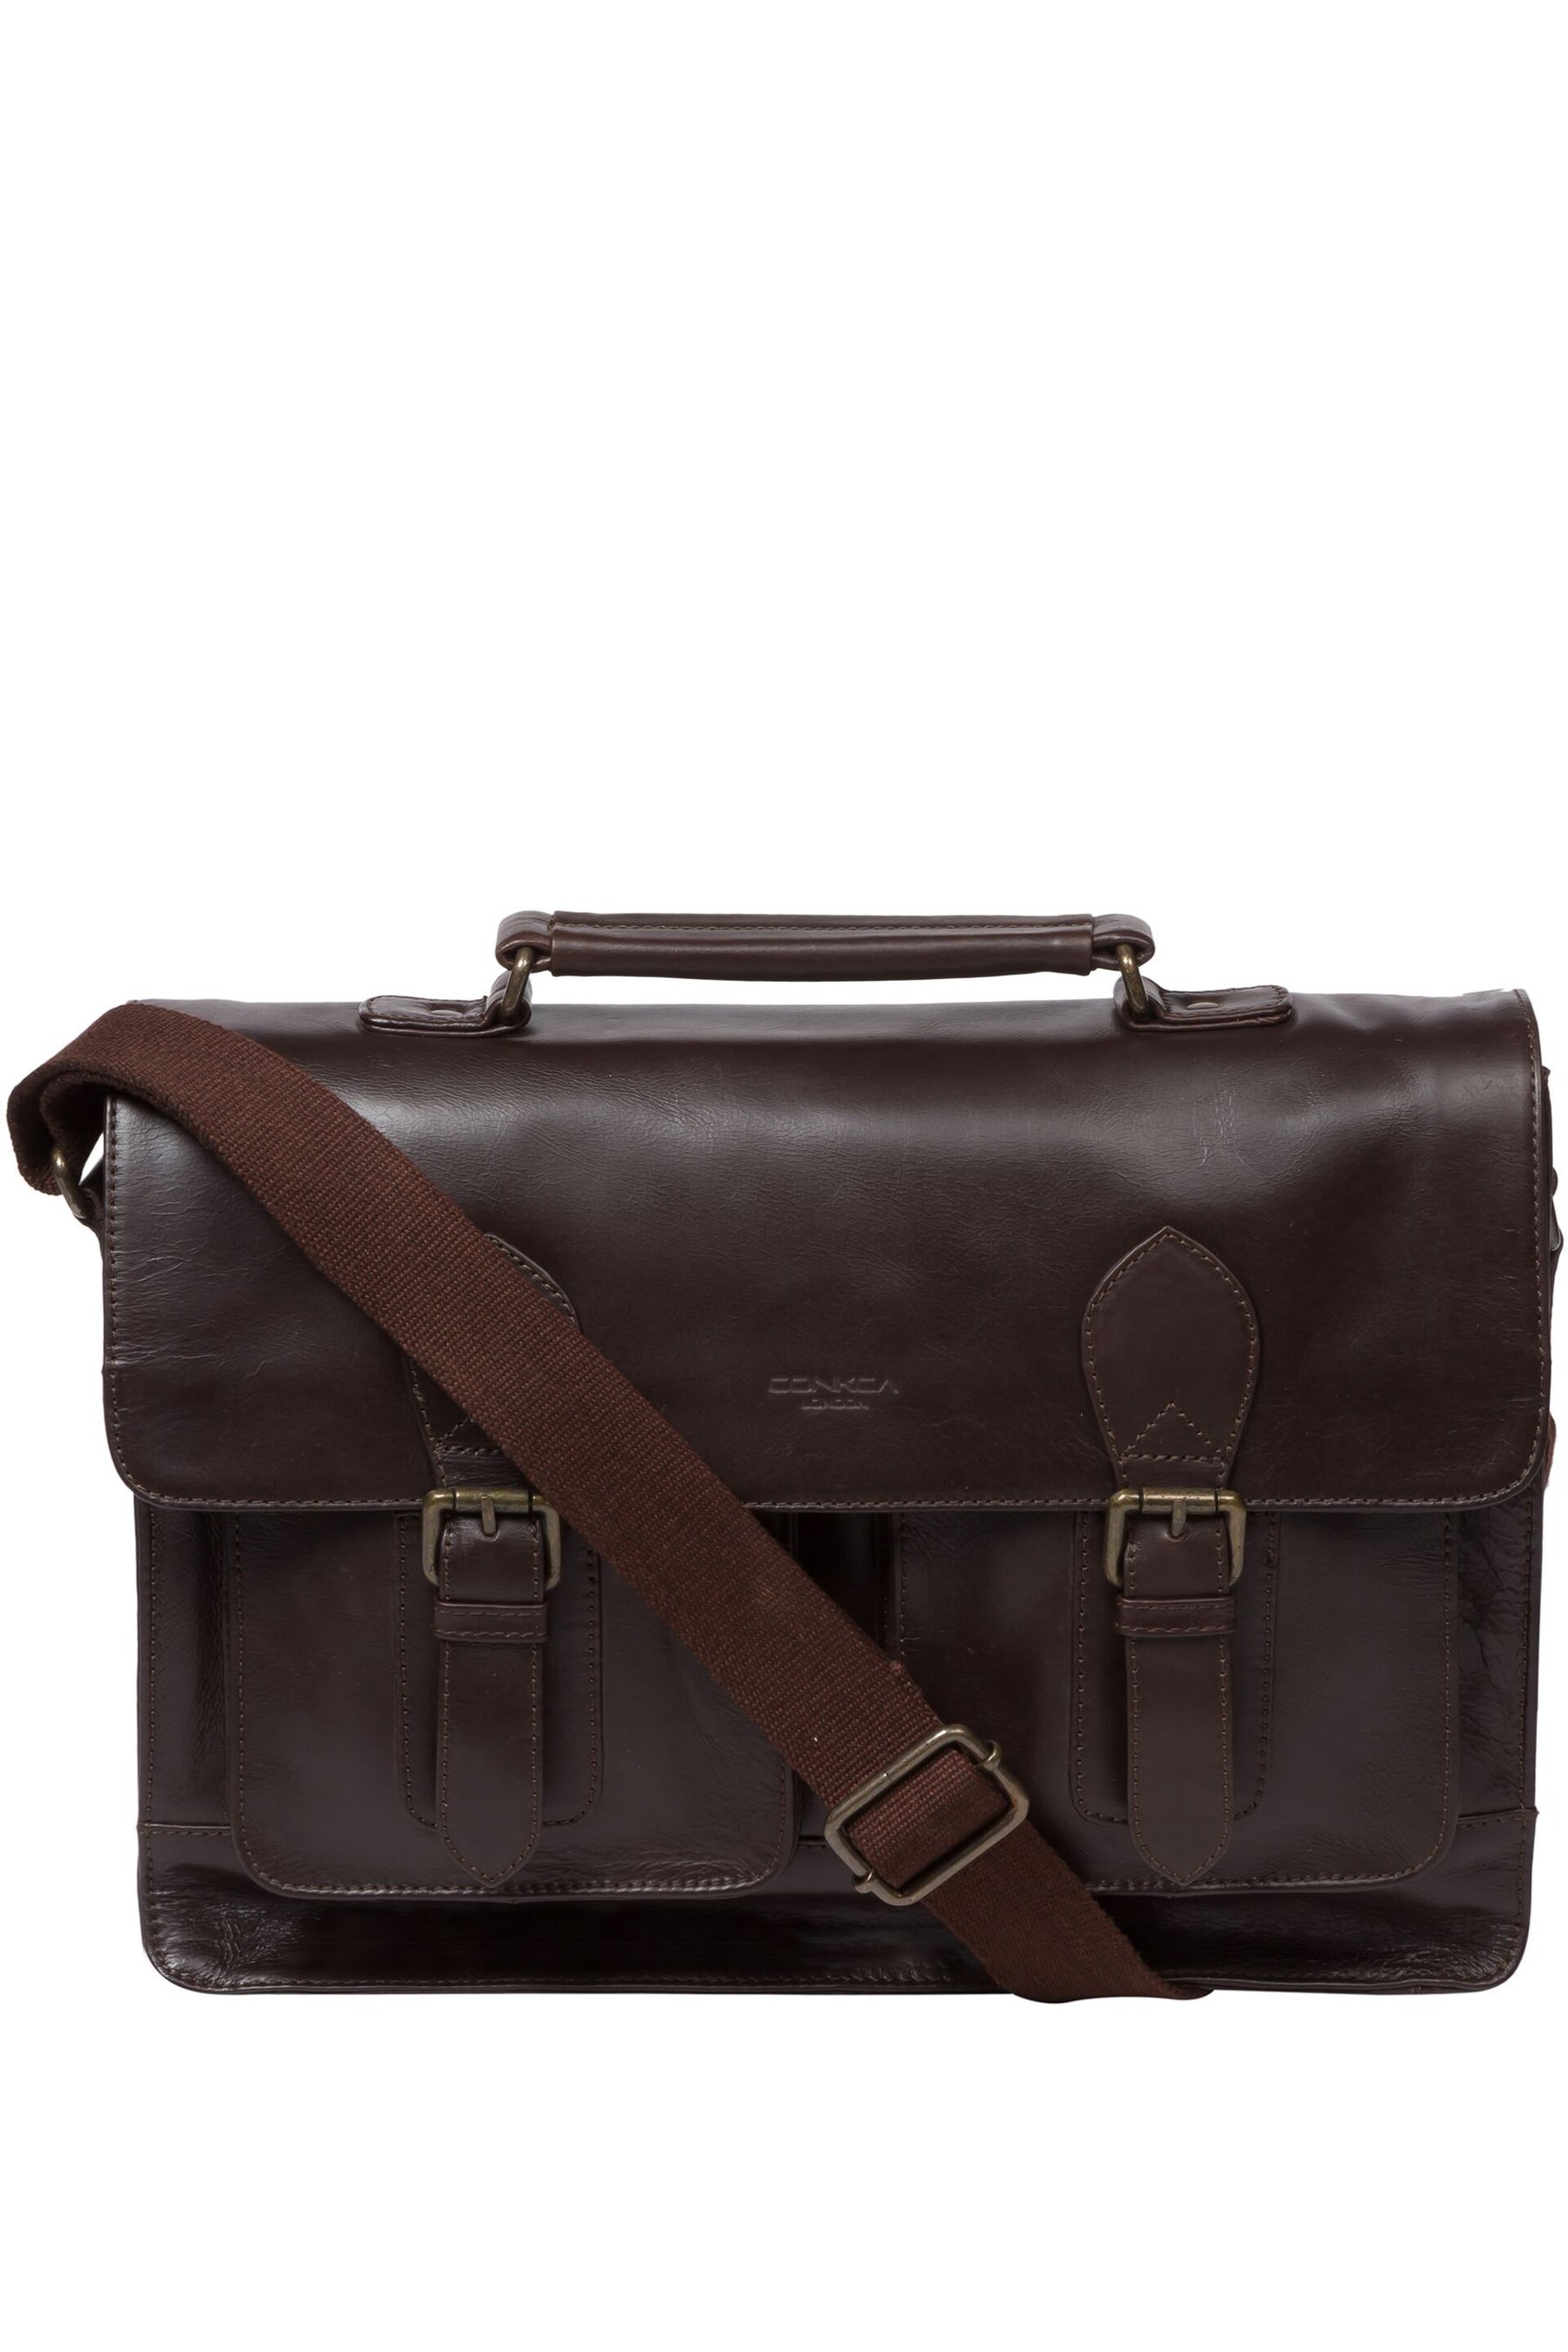 Conkca Pinter Leather Work Bag - Image 1 of 8